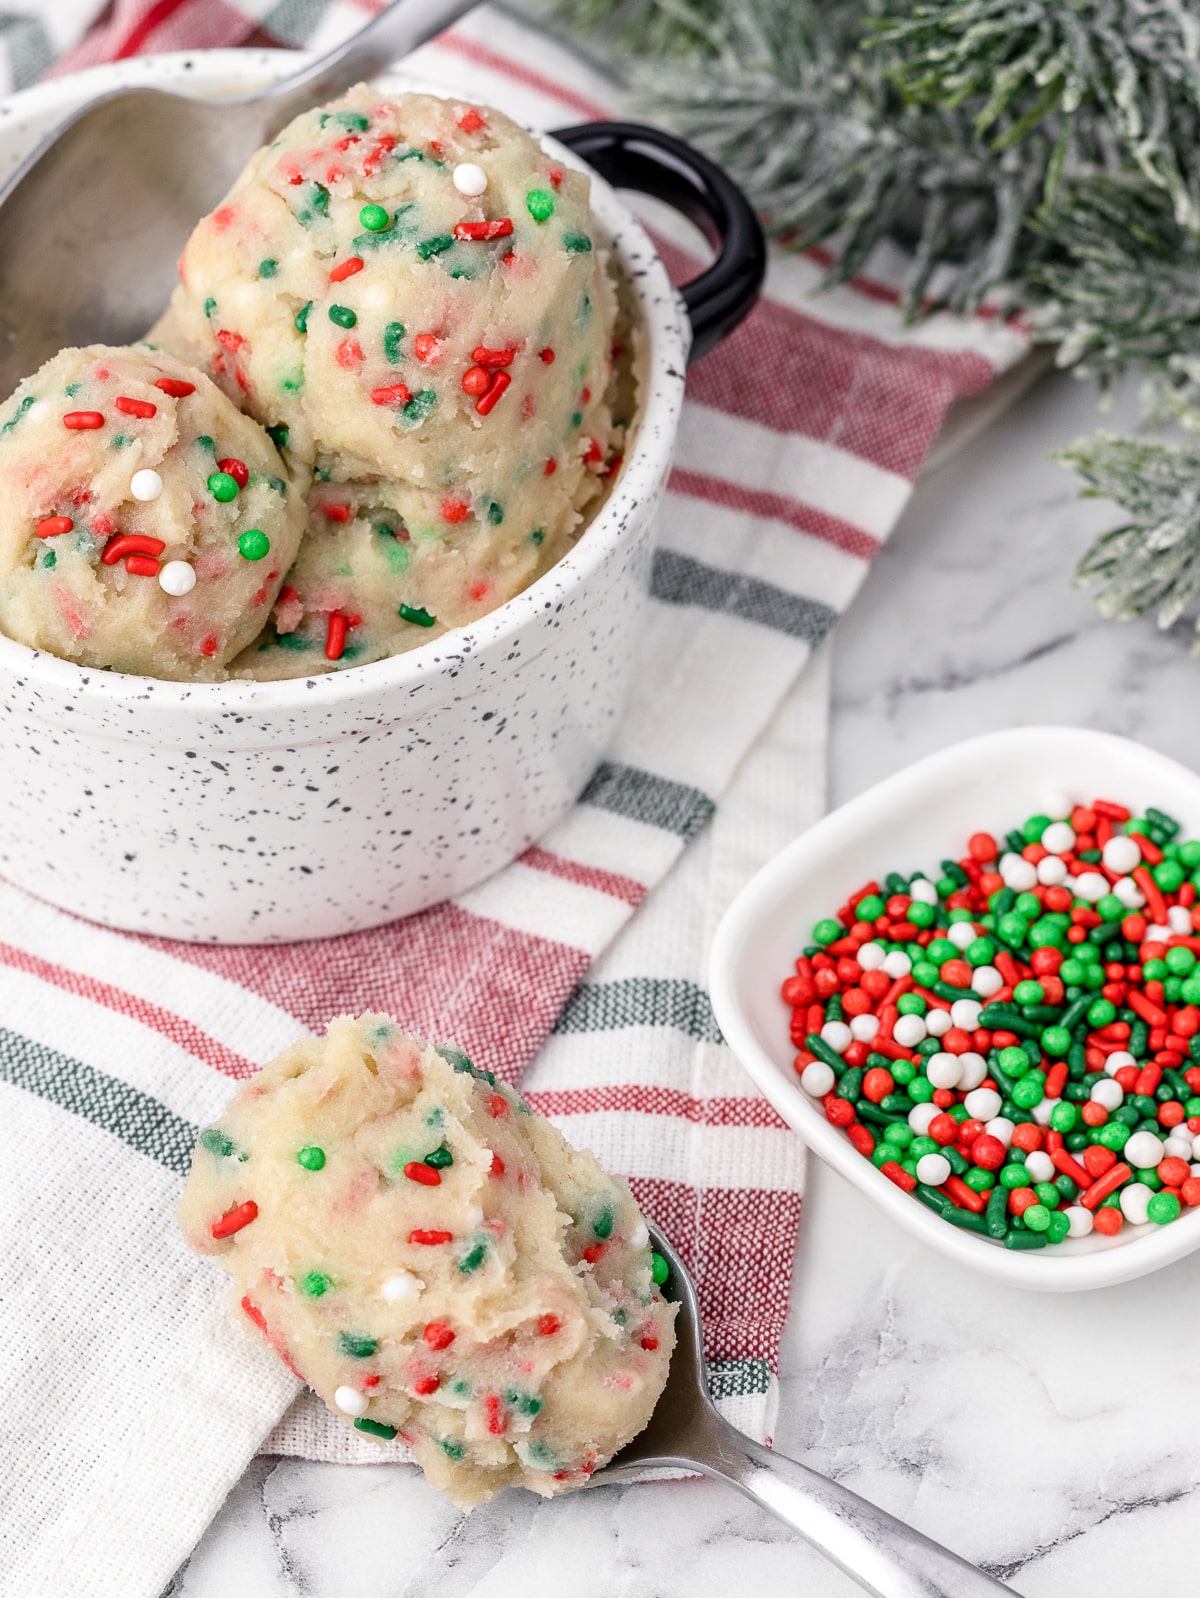 Edible Cookie Dough with two spoons scooping it and sprinkles on the side.